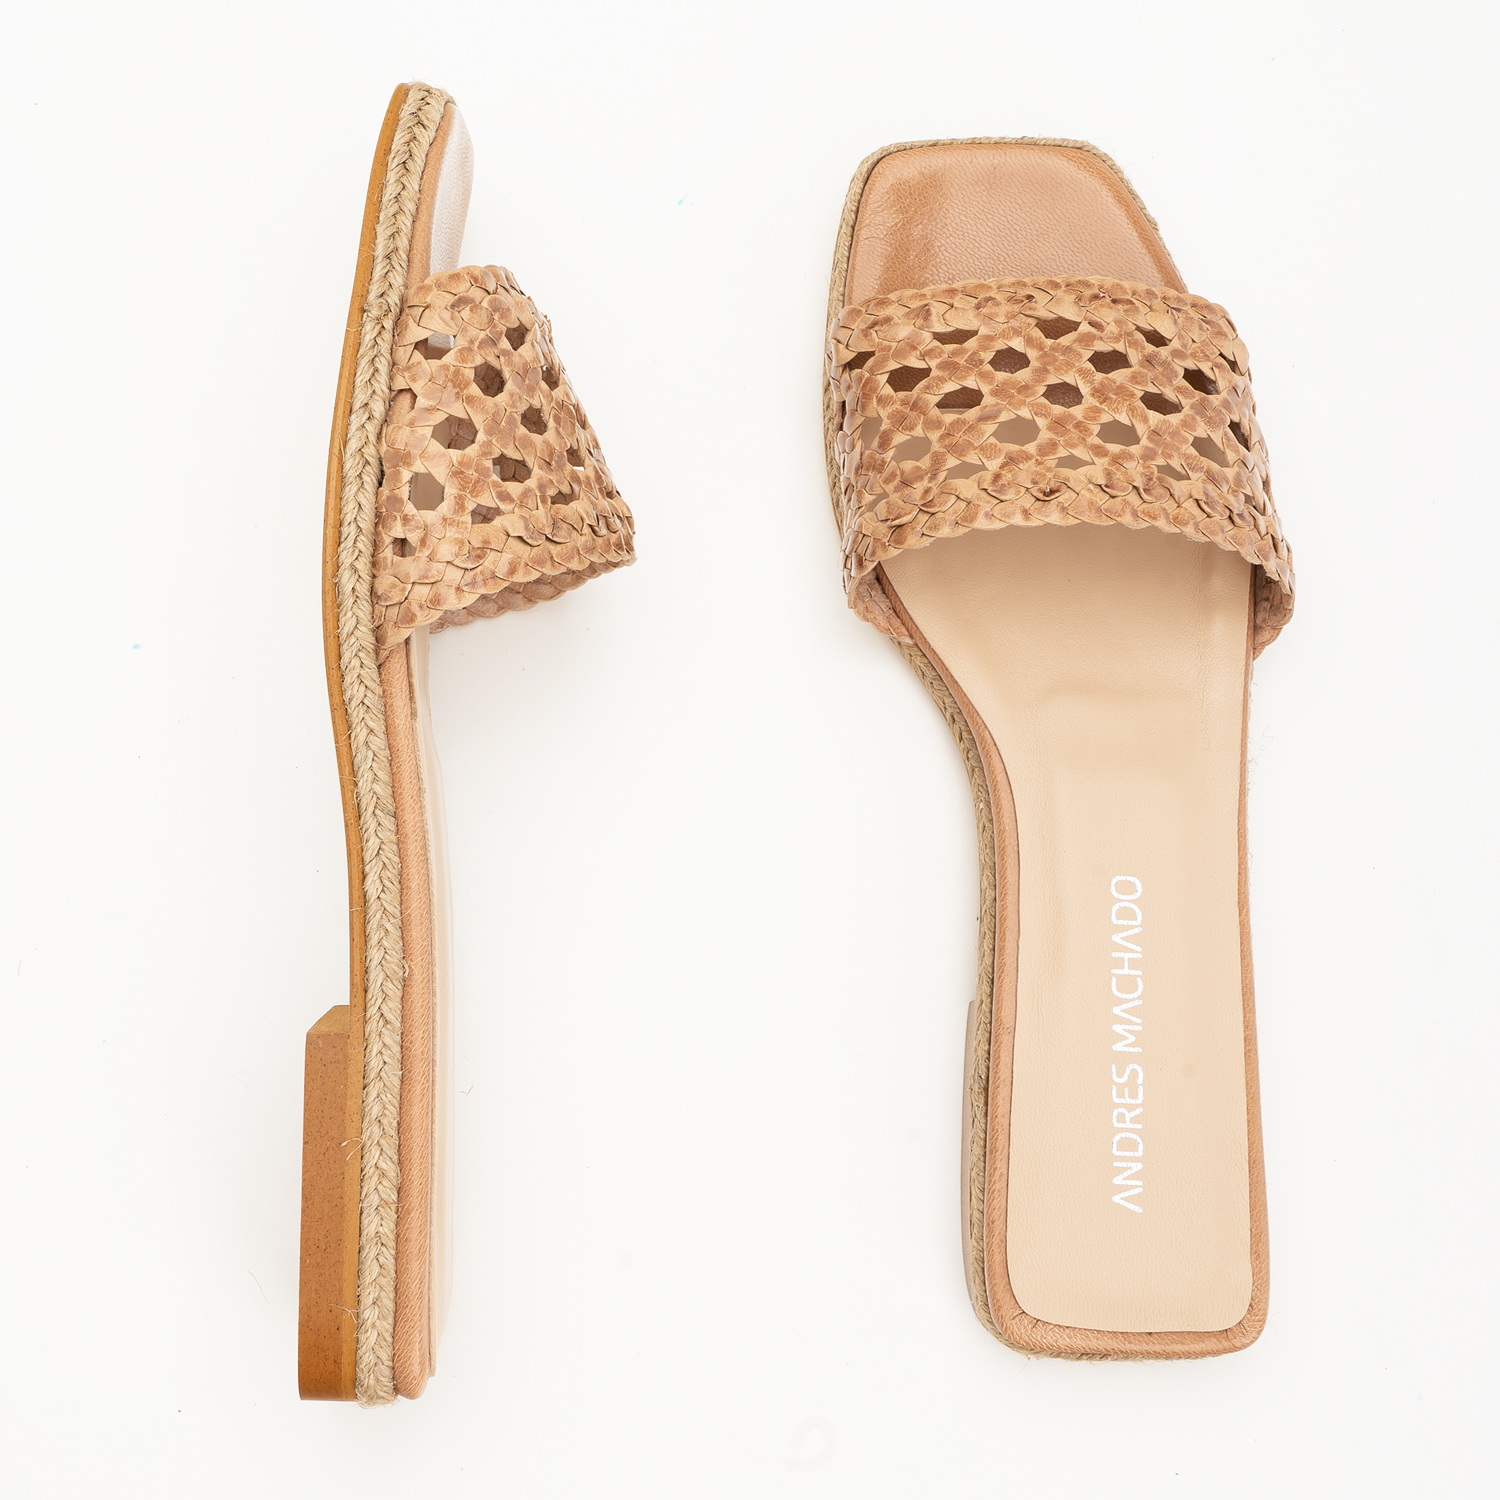 Flat Sandals in Beige Braided Leather 